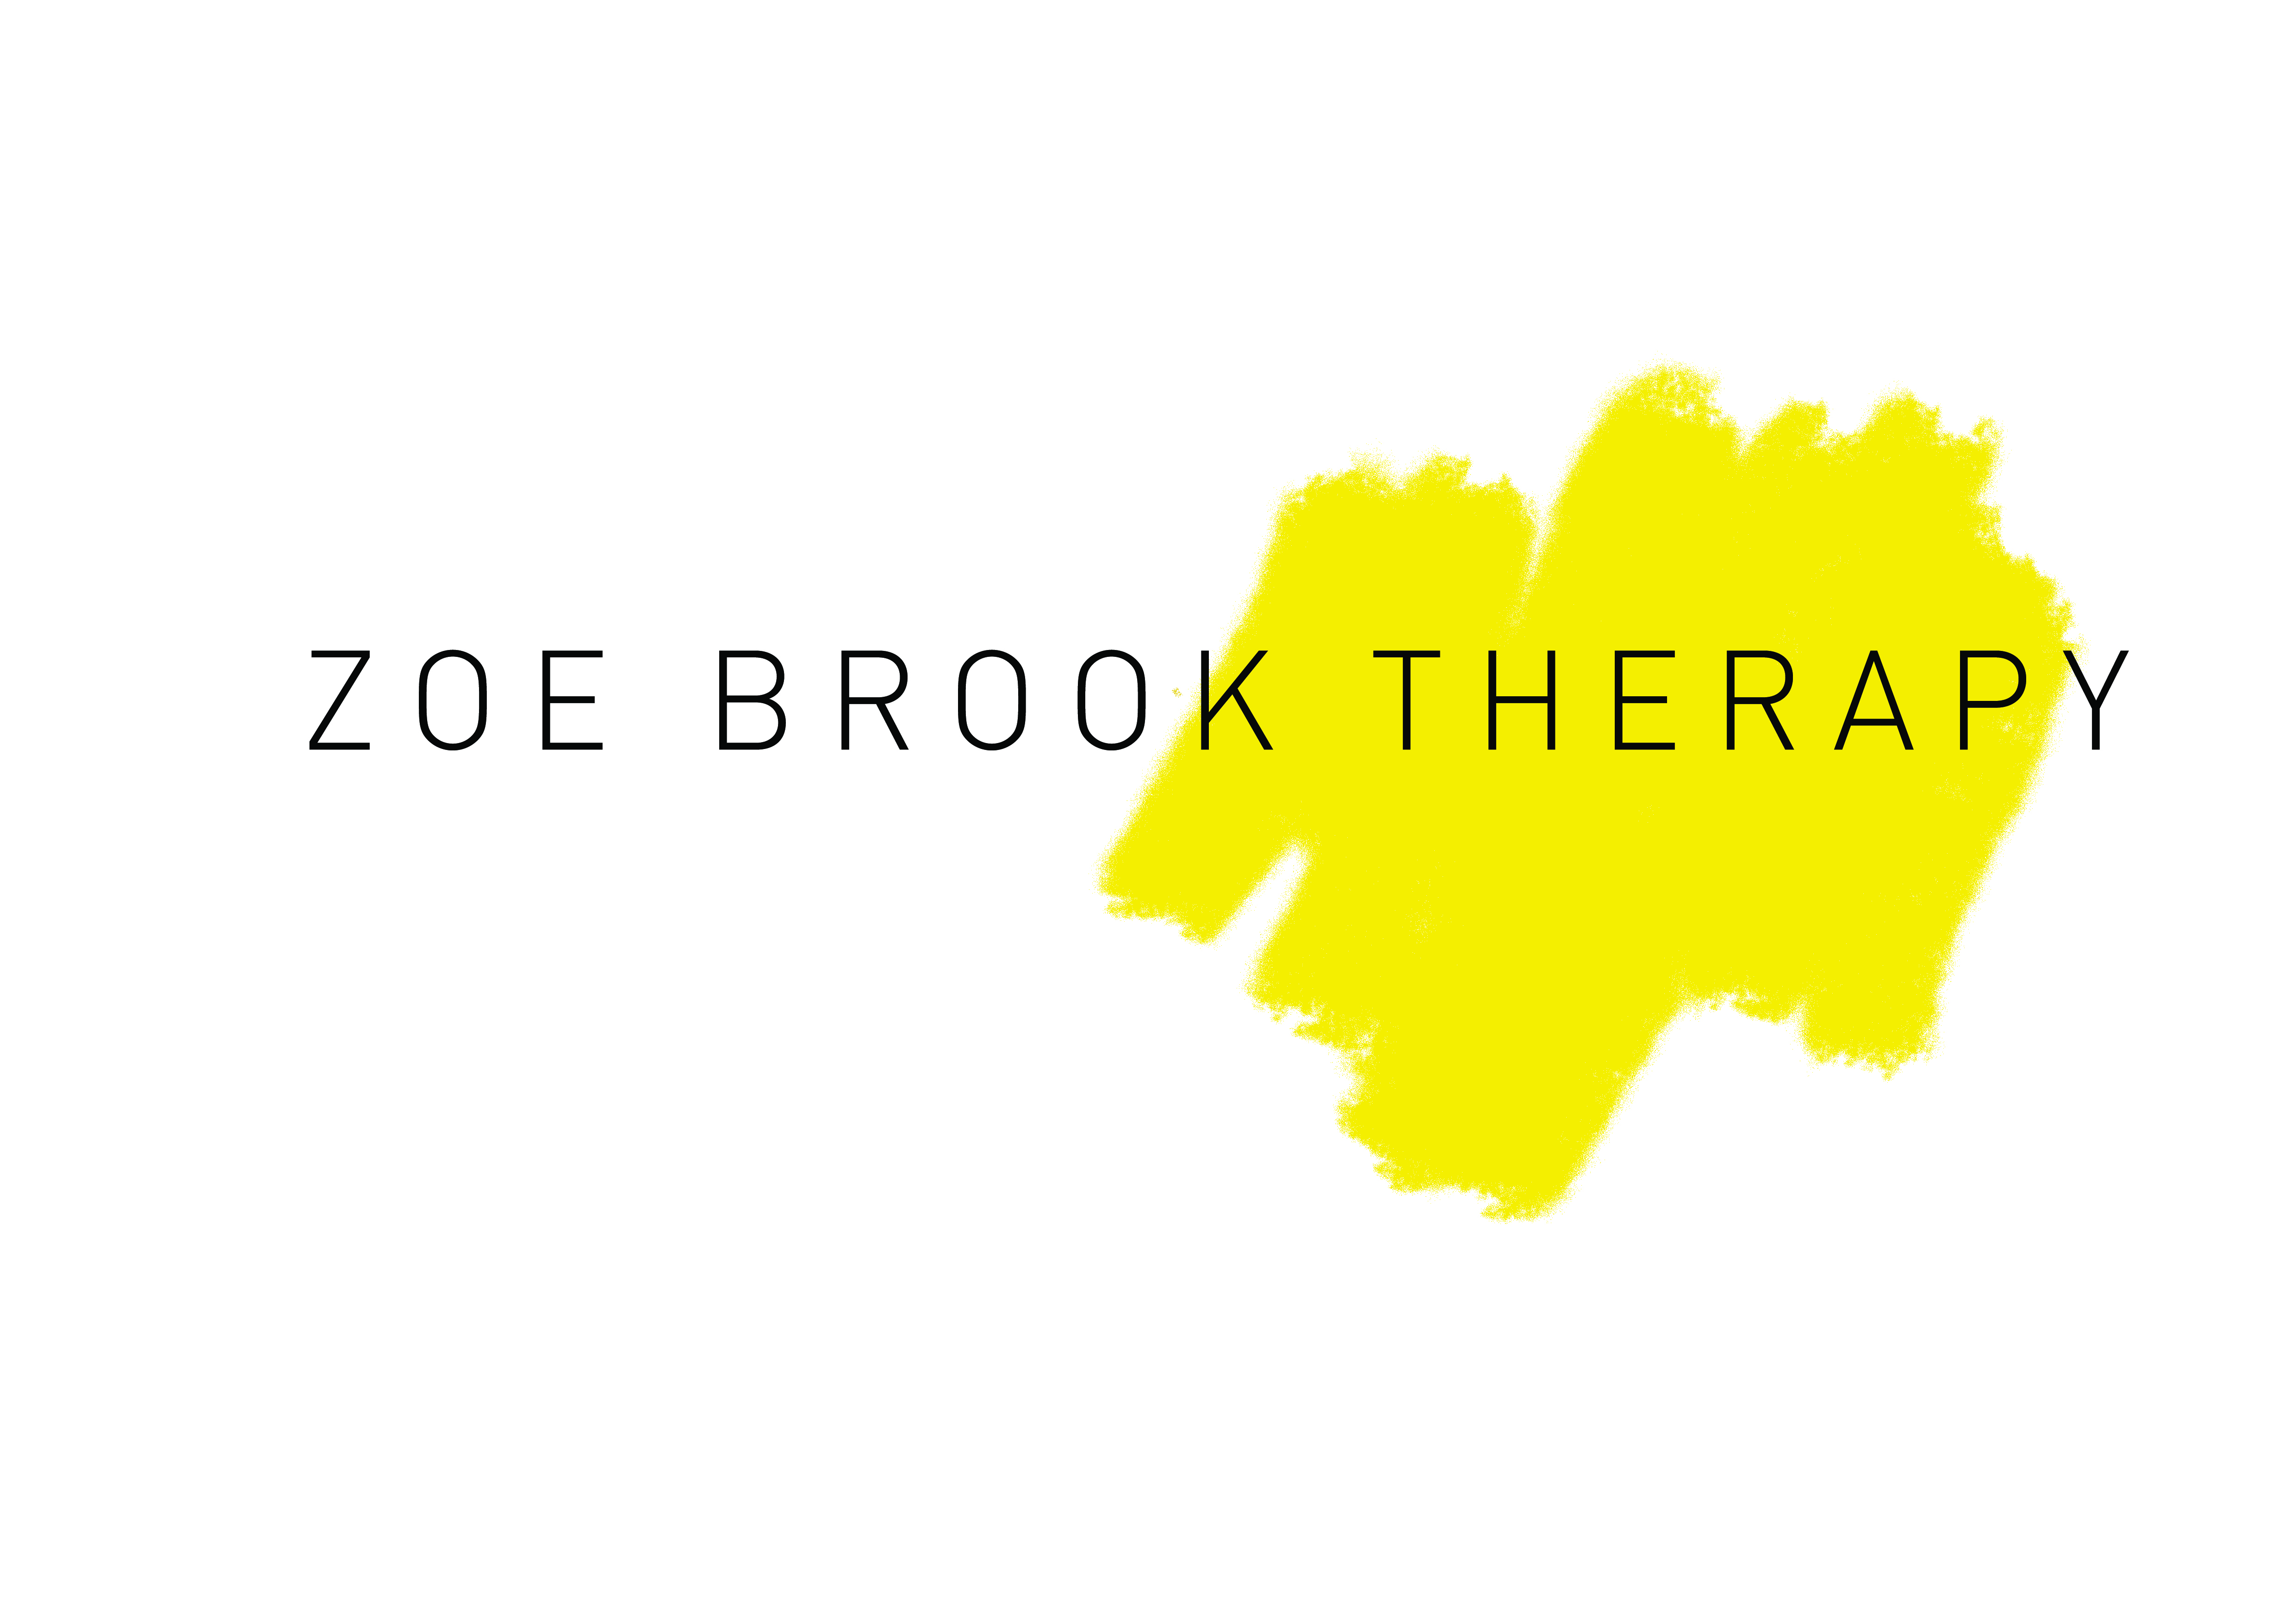 Zoe Brook Therapy